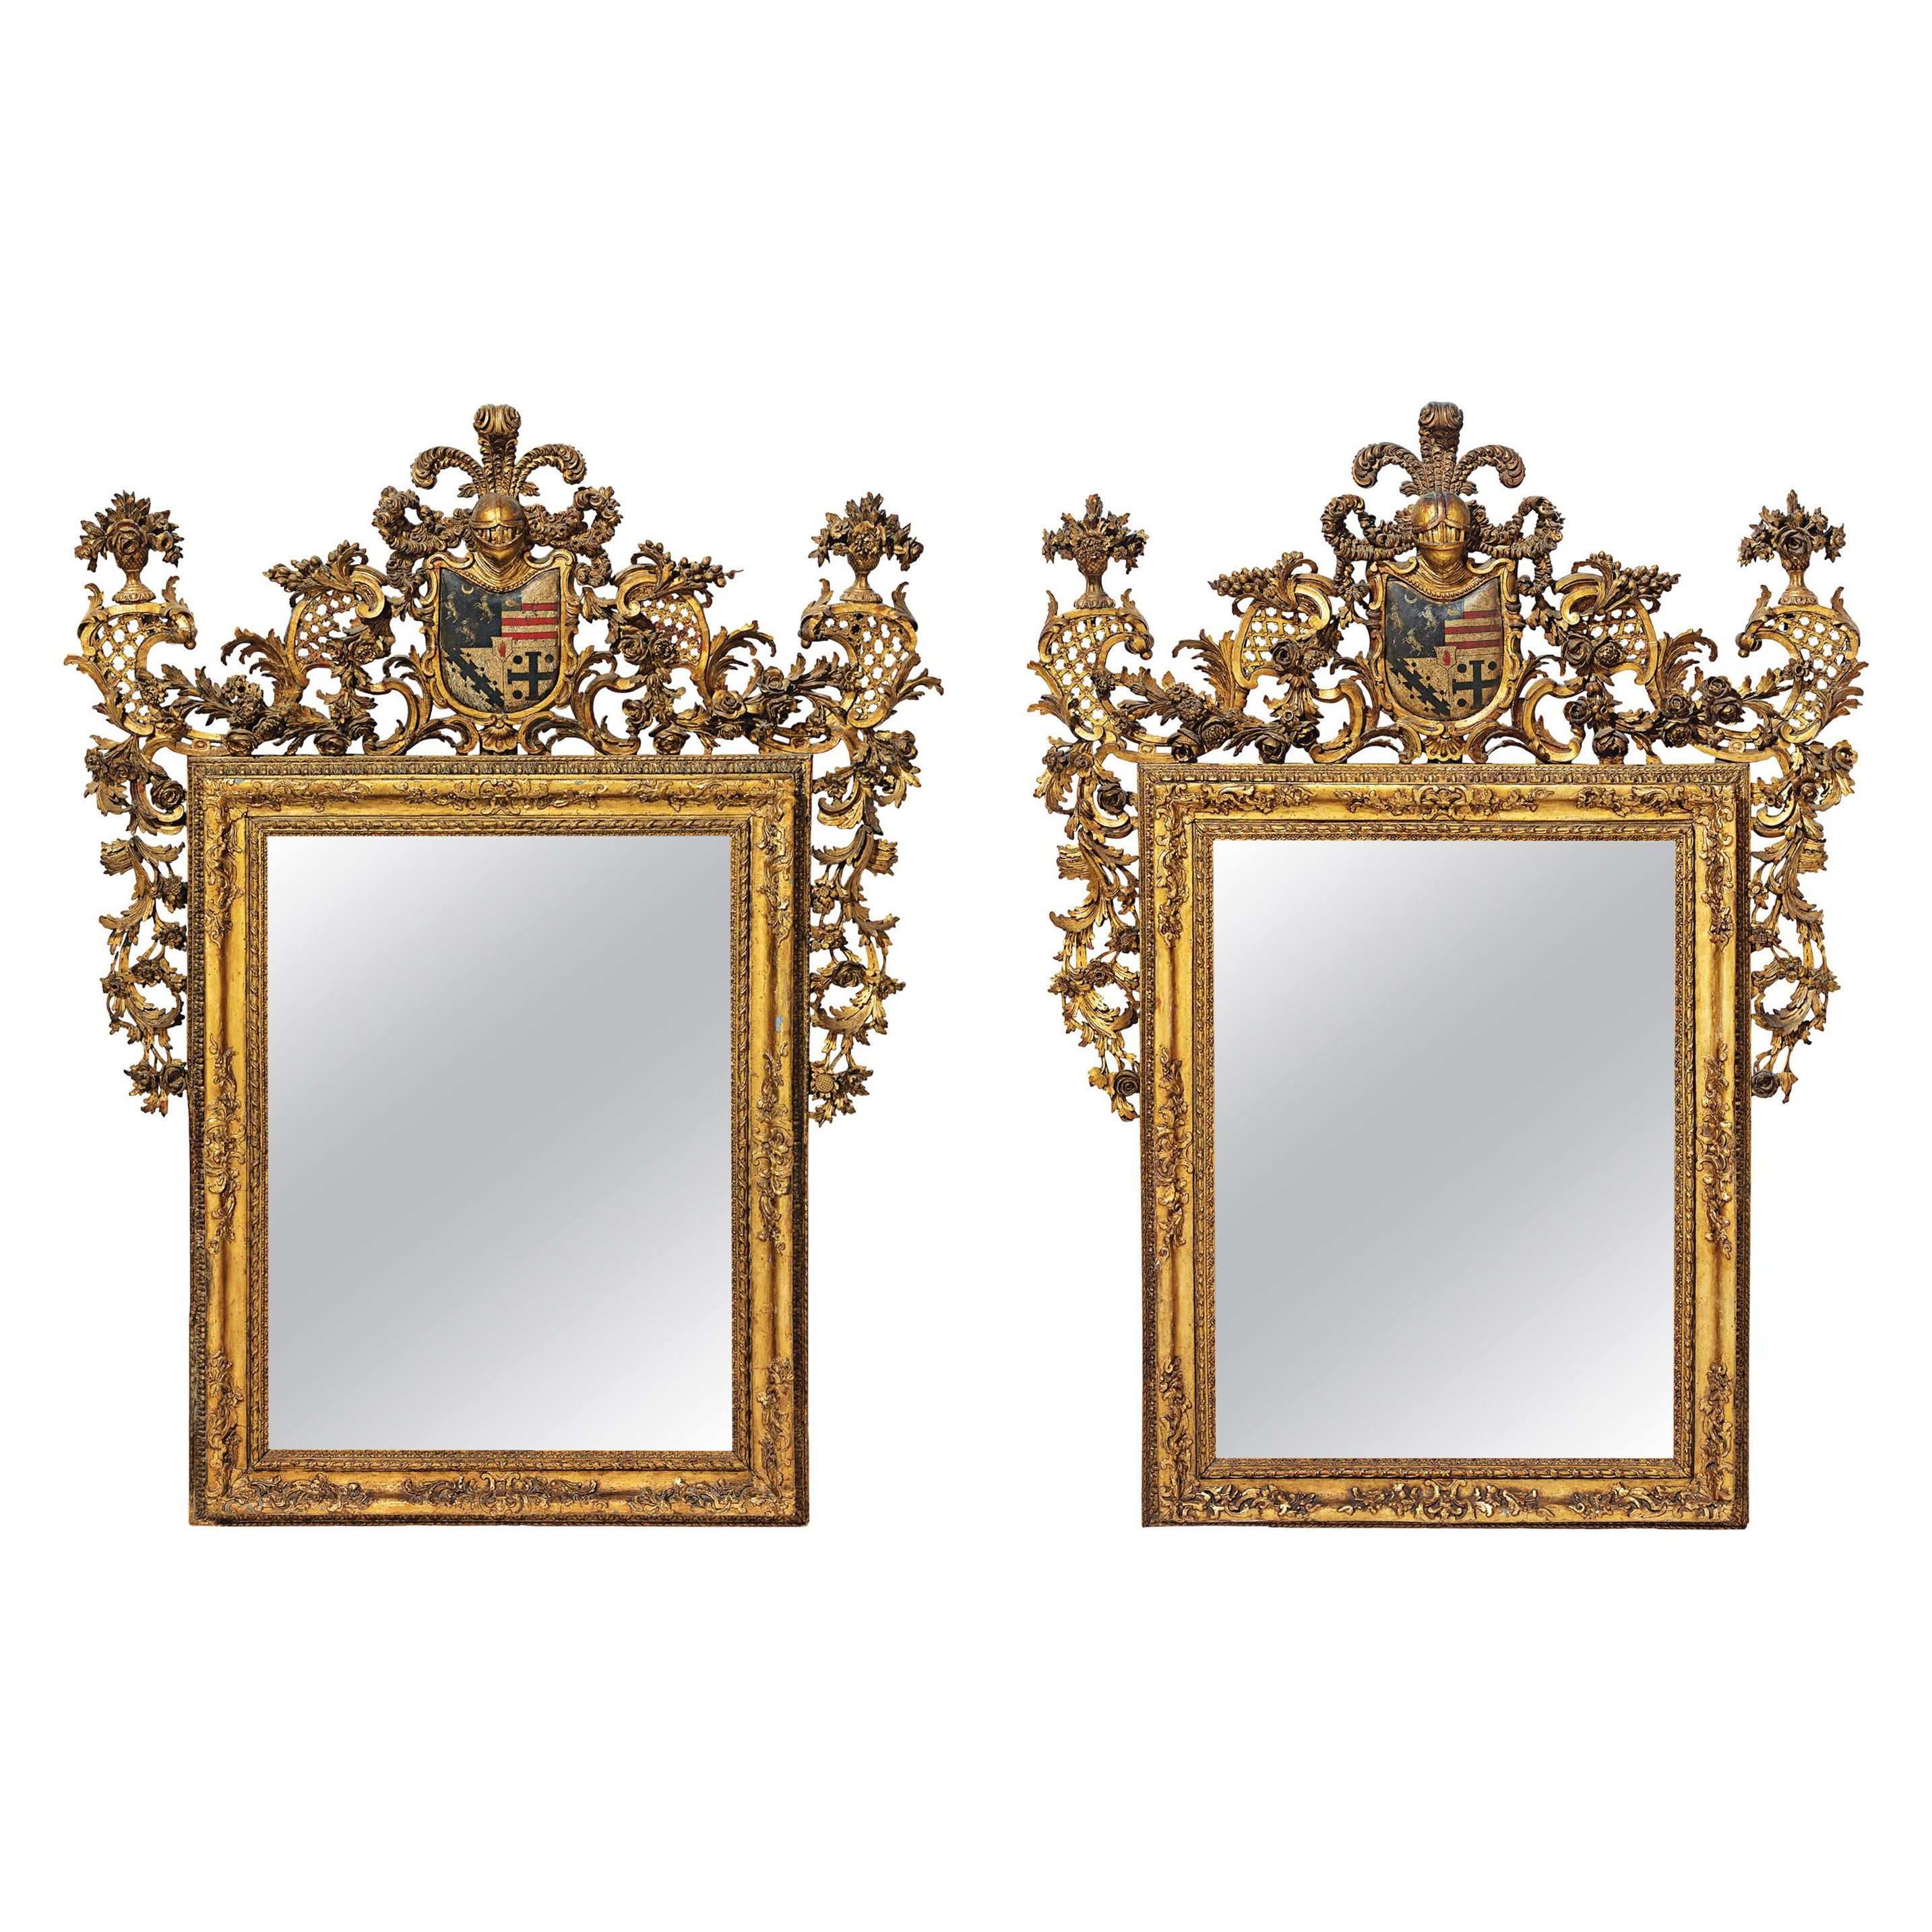 Fine and Important Pair of Polychrome Decorated Giltwood Mirrors For Sale